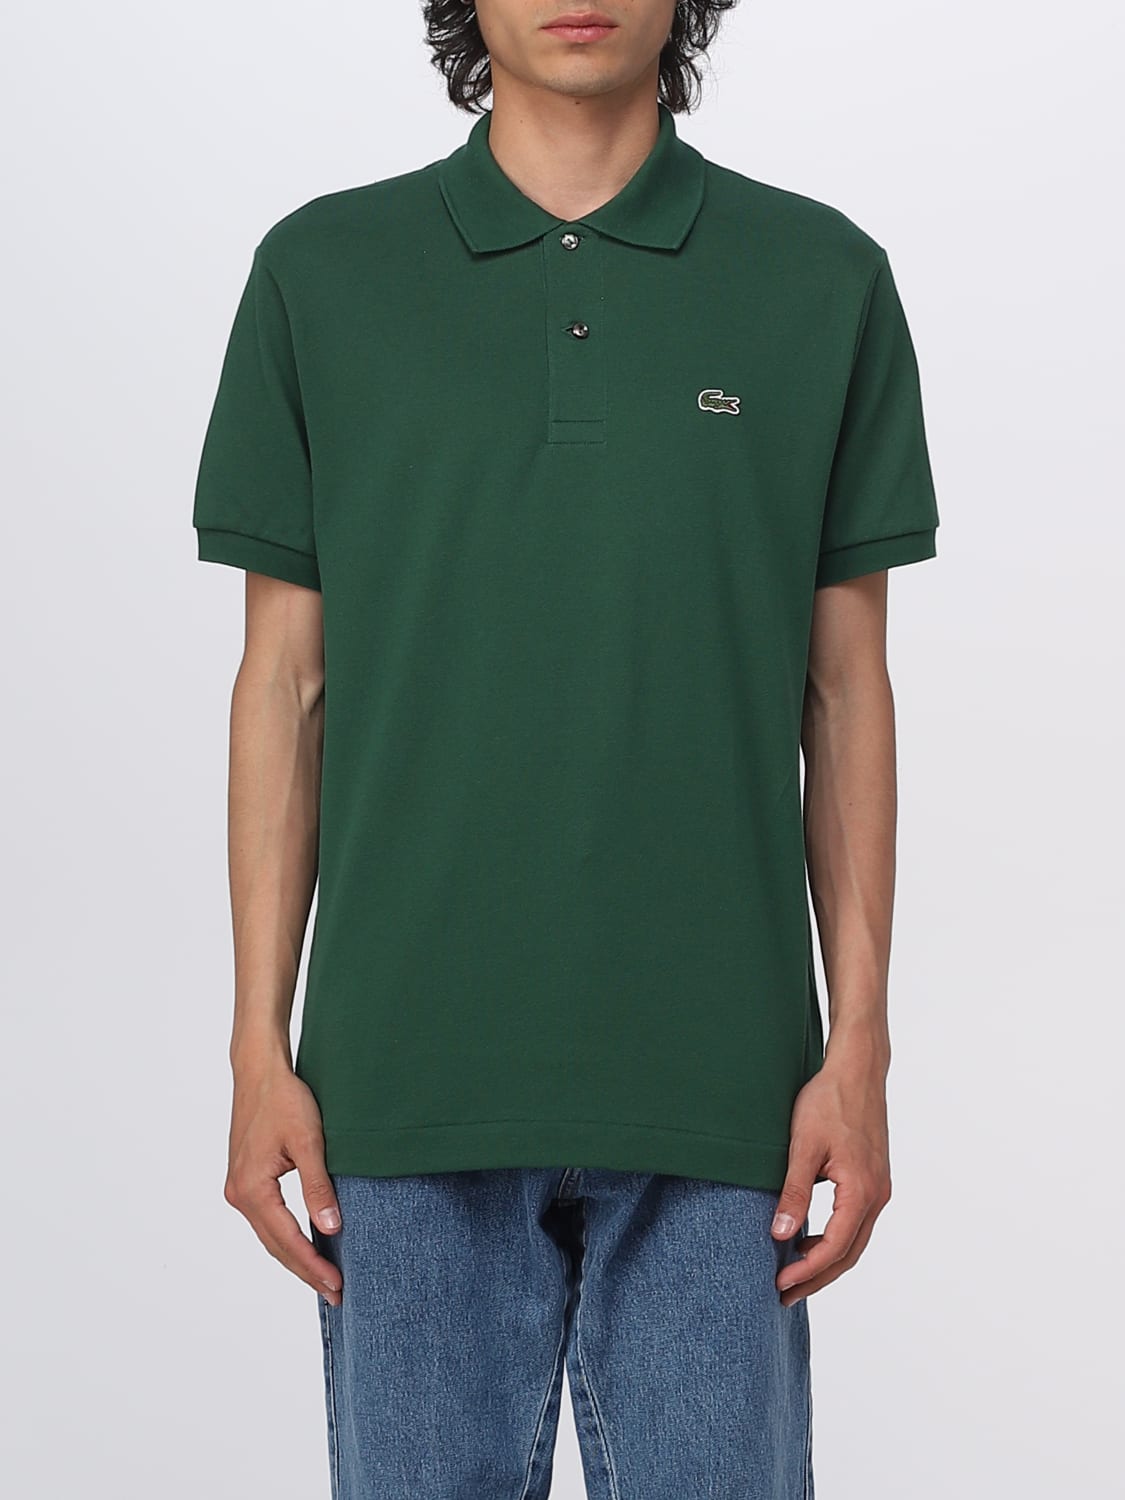 Lacoste Outlet: polo shirt for man - Forest Green | Lacoste polo